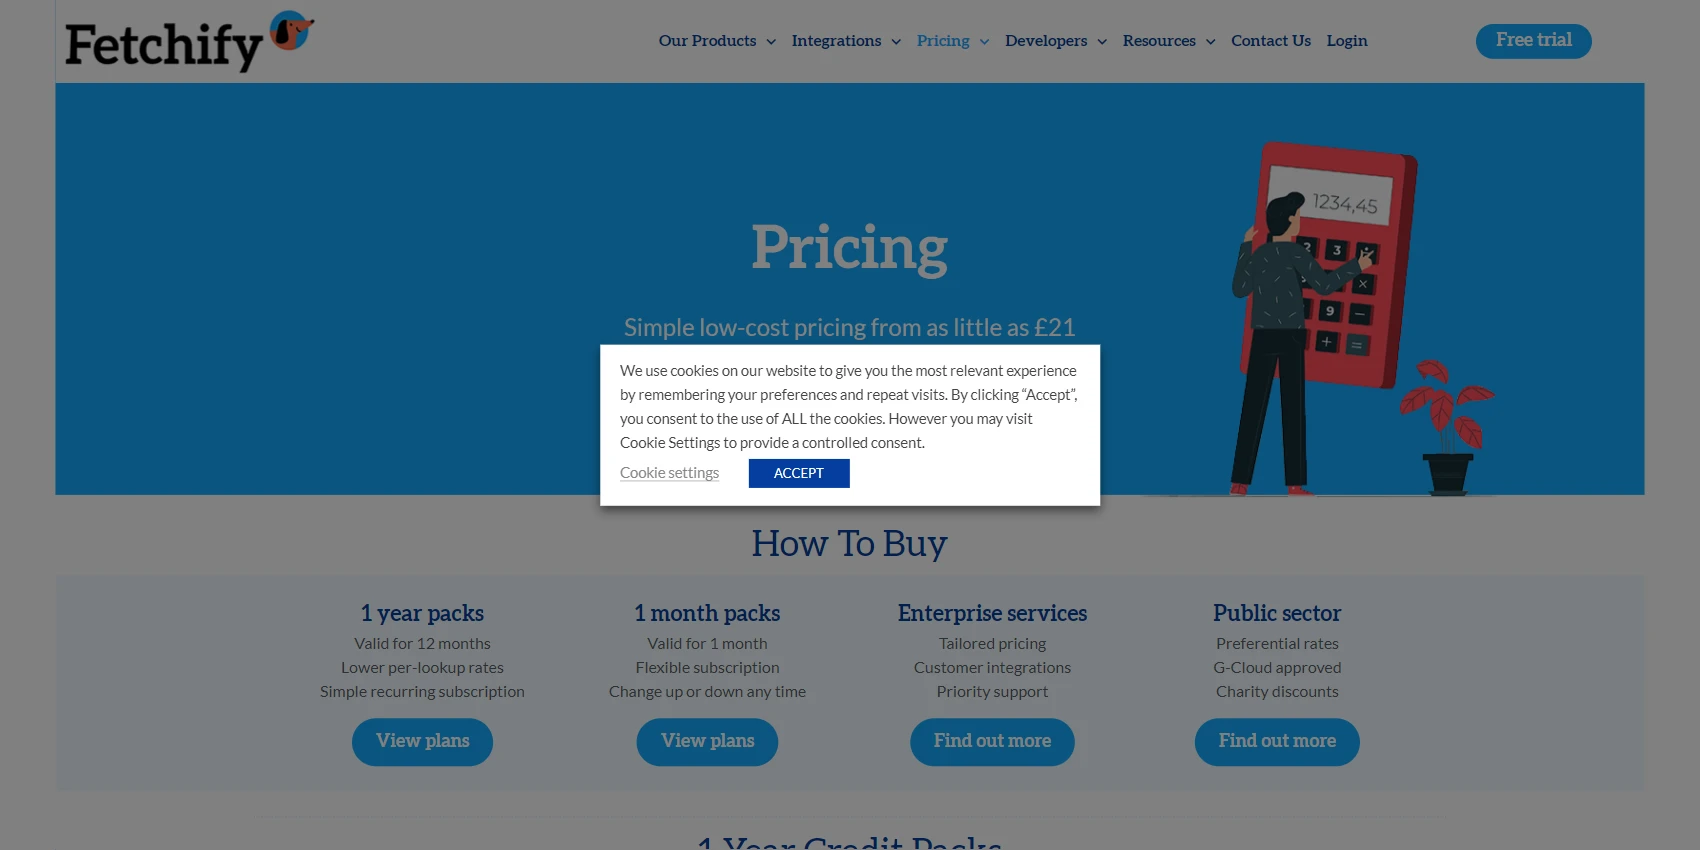 4. Fetchify Pricing